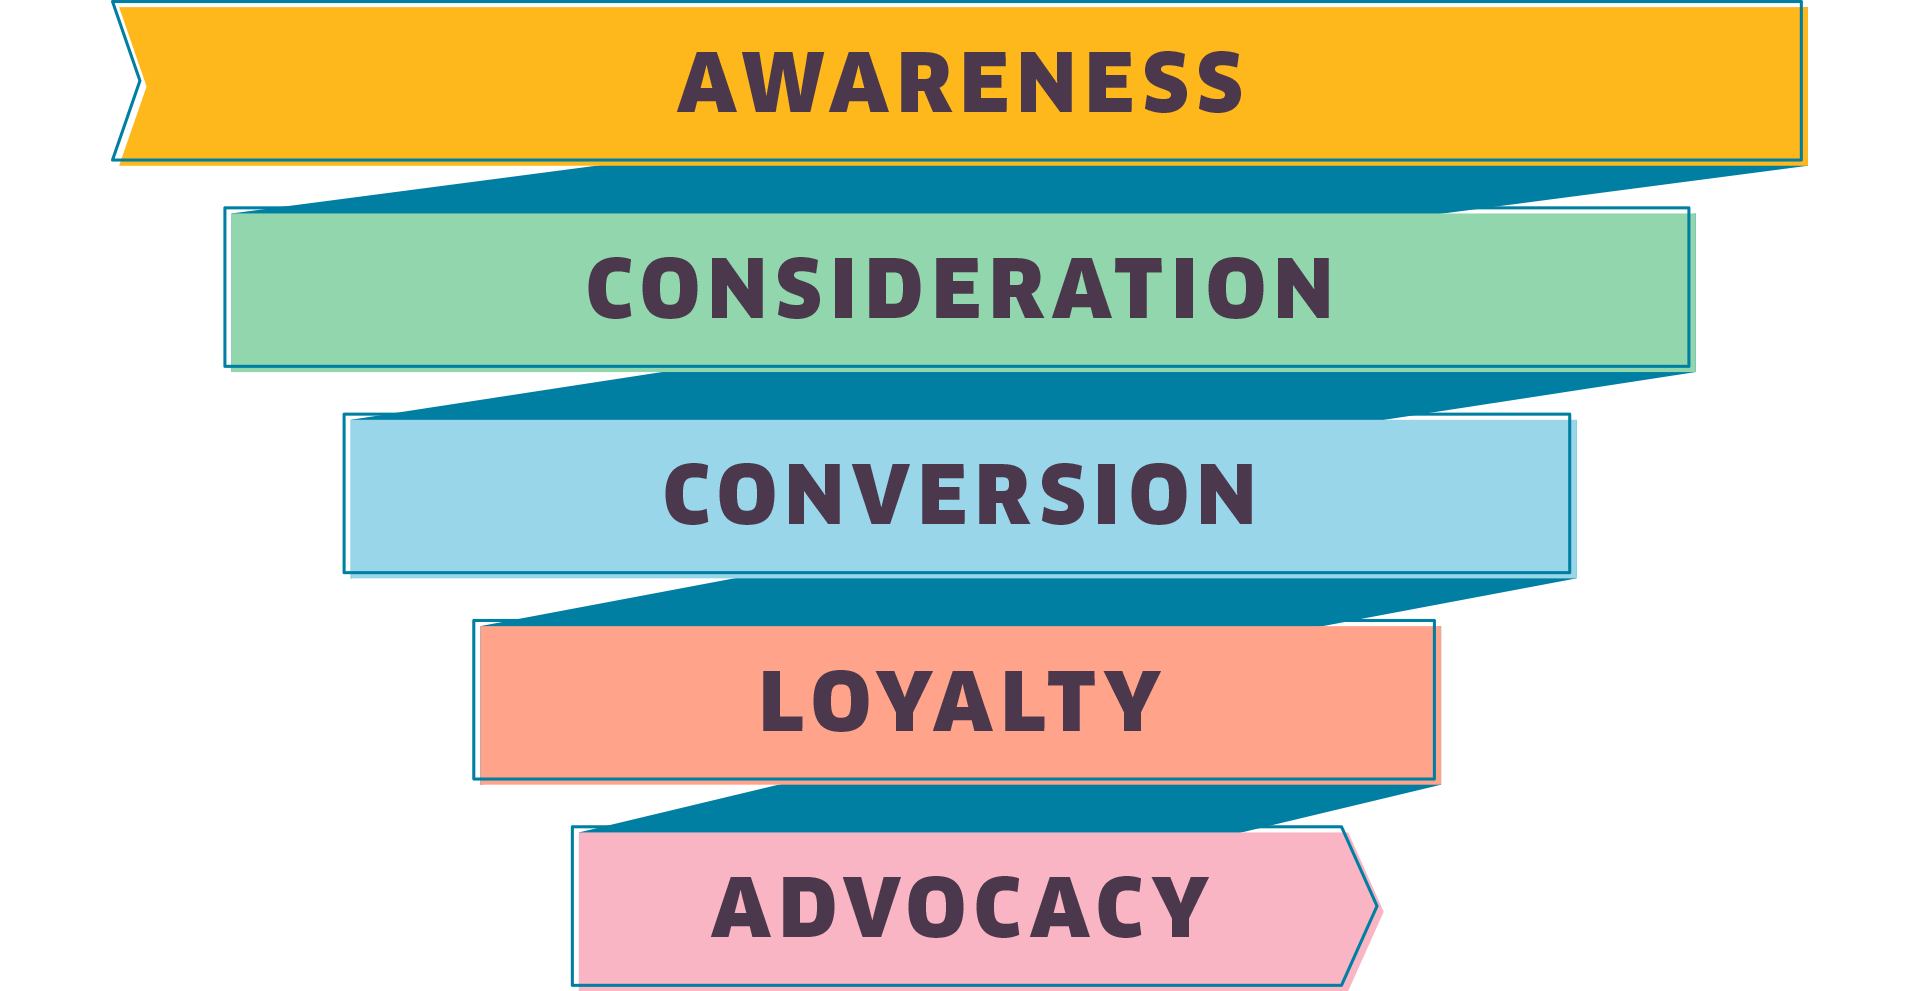 An illustration of the marketing funnel, including awareness, consideration, conversion, loyalty, and advocacy phases.